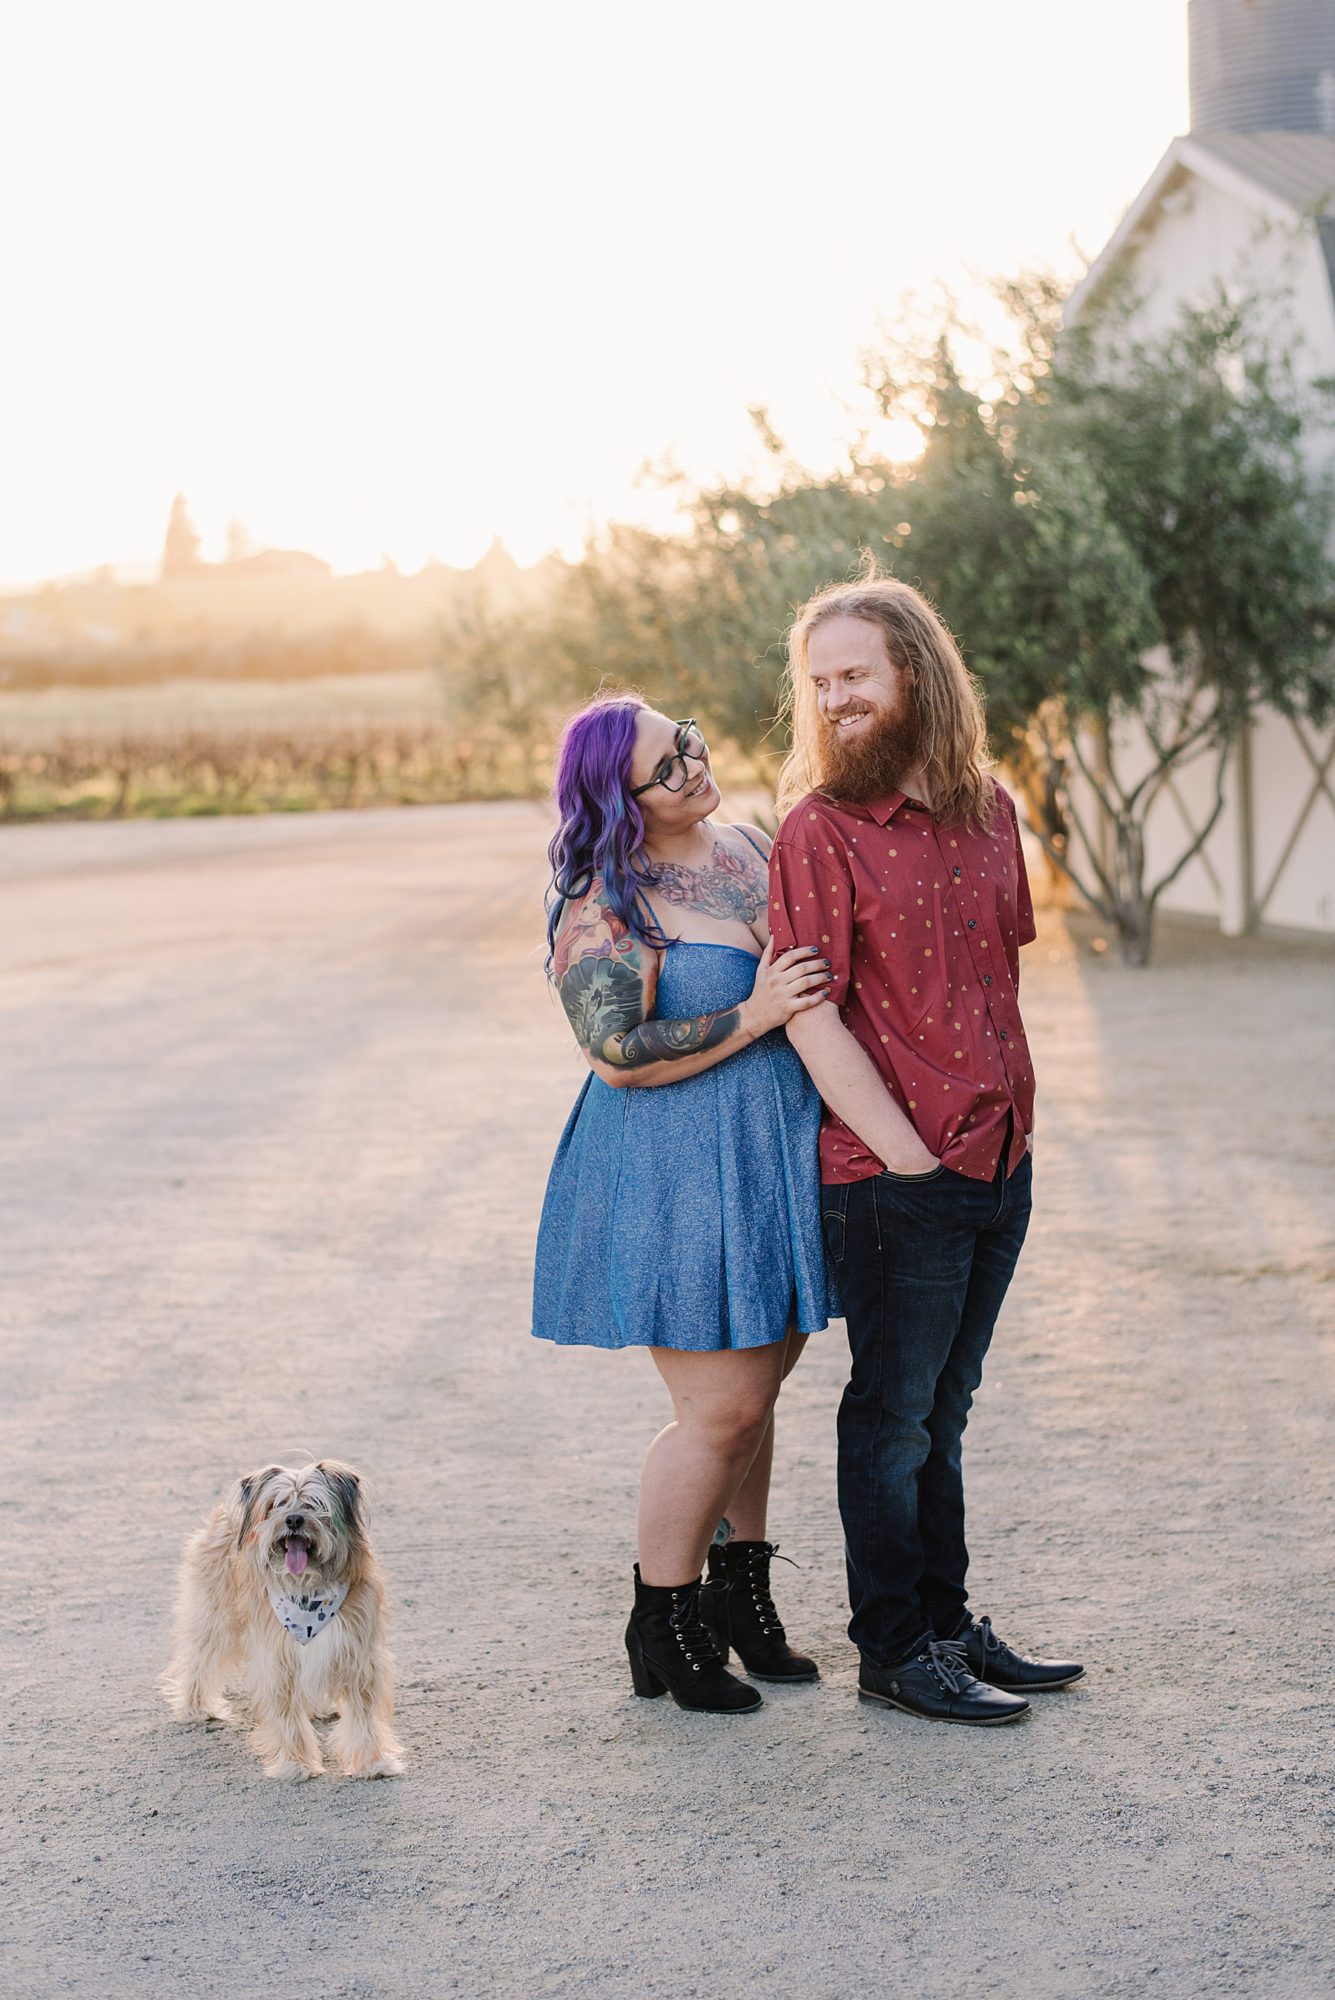 Biddle Ranch Nerdy Engagement Session in San Luis Obispo Wine Country